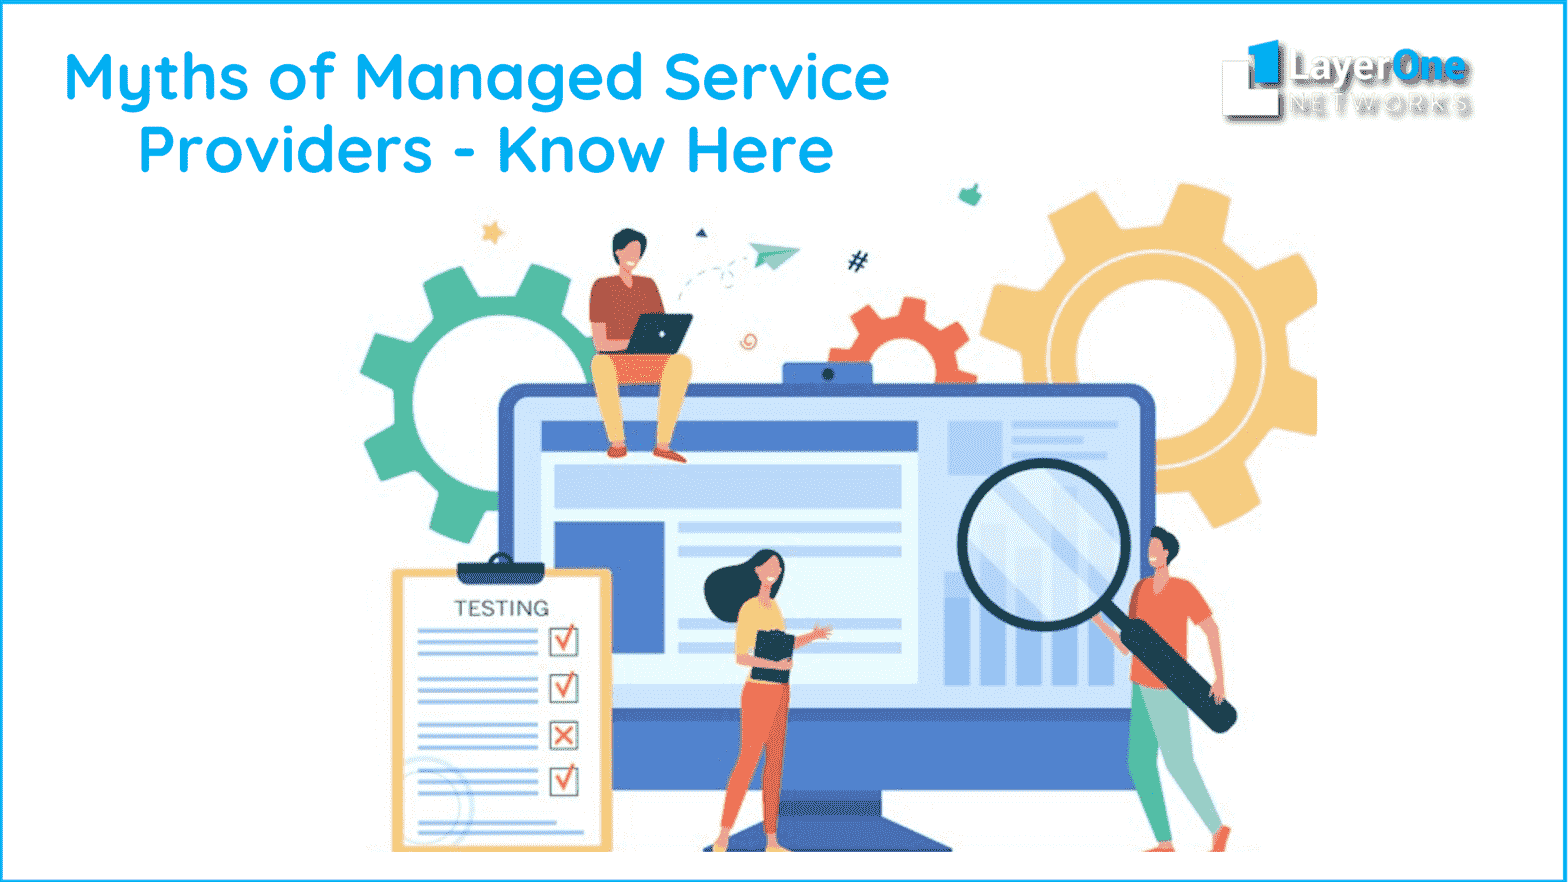 Myths of Managed Service Providers - Know Here